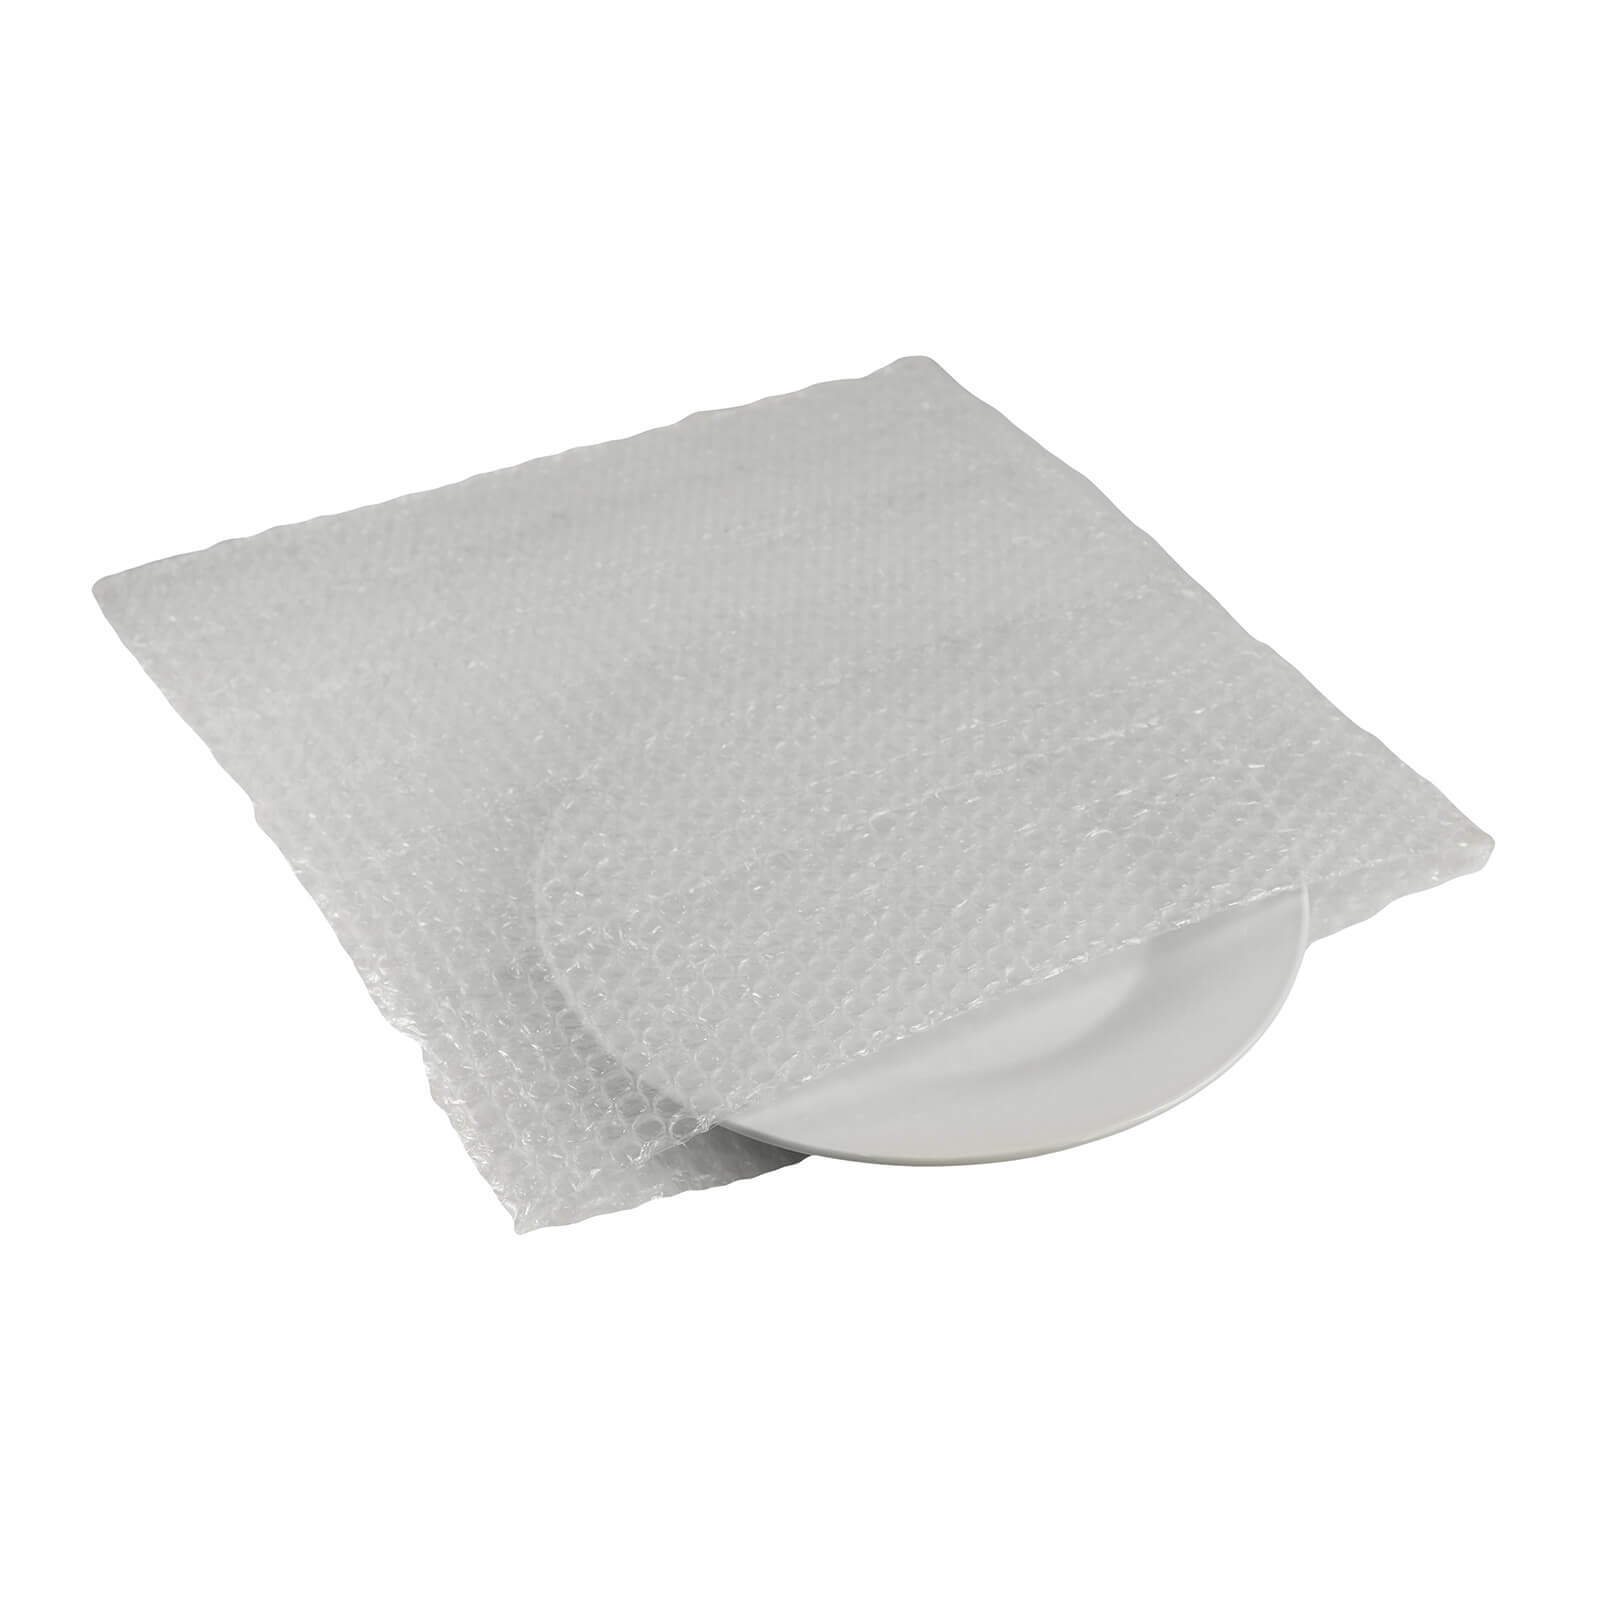 Photo of Dual Layer Bubble Pouches - 15 Pack